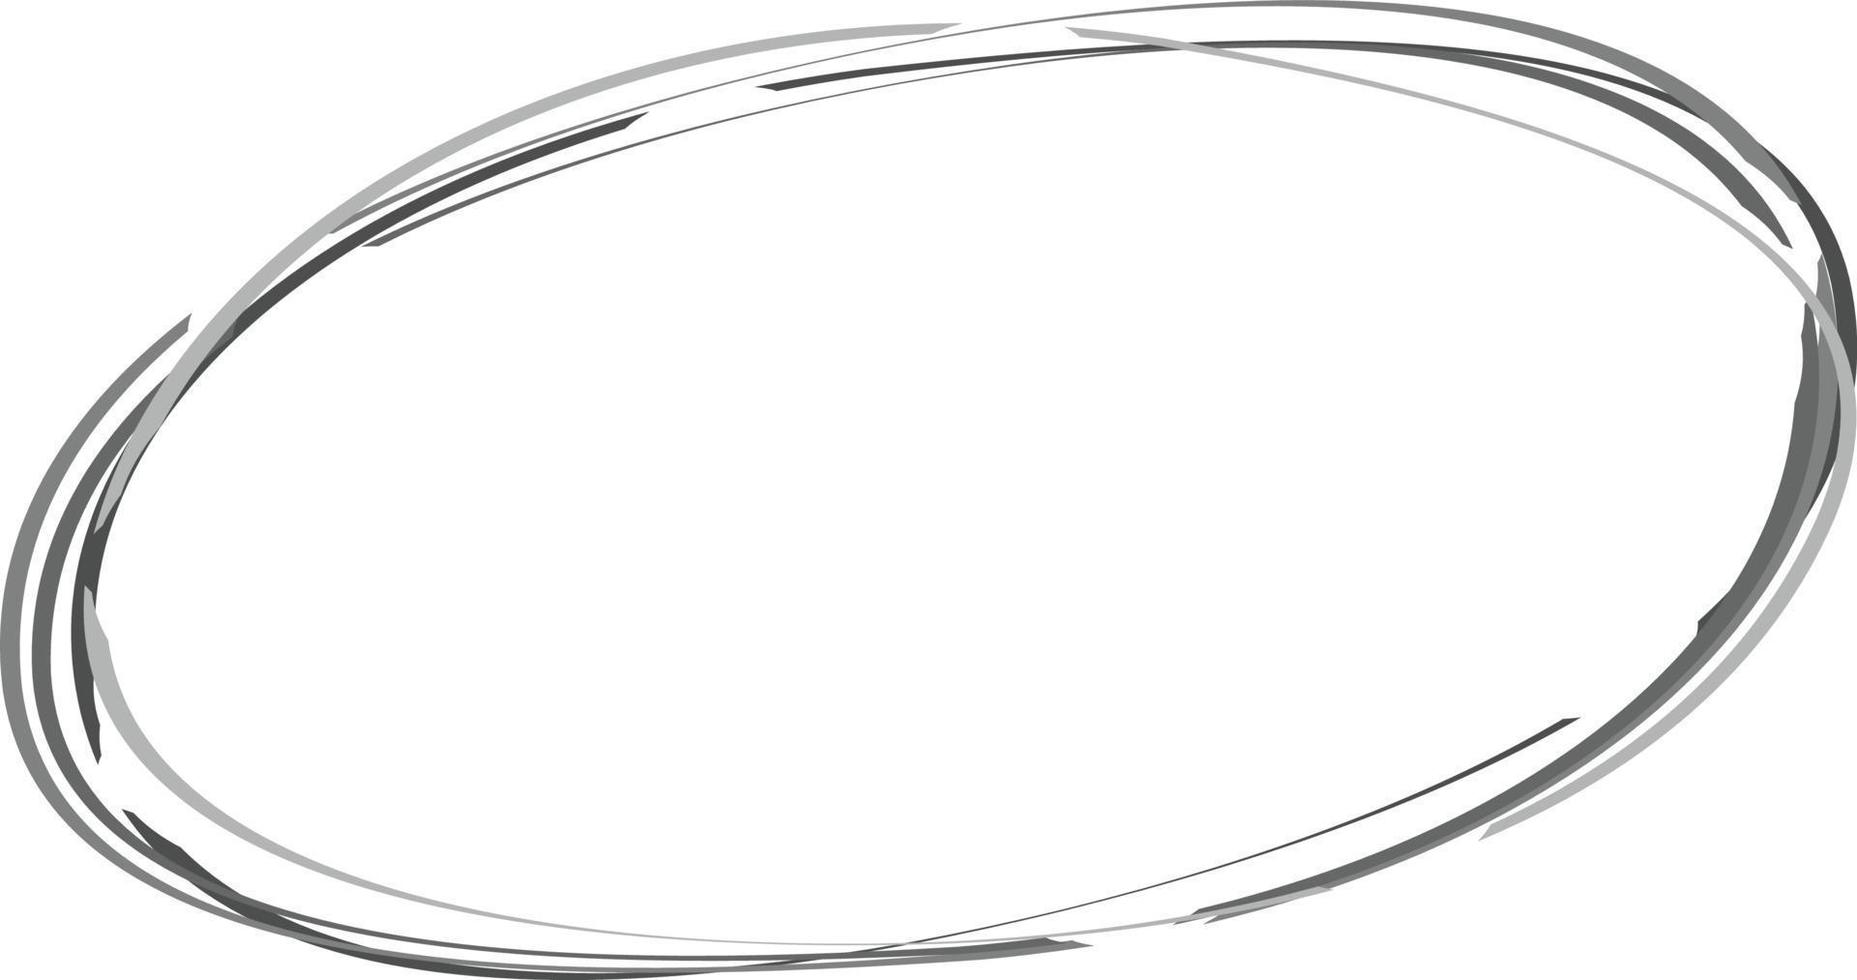 Round frame, a set of randomly overlapping curves 3 vector